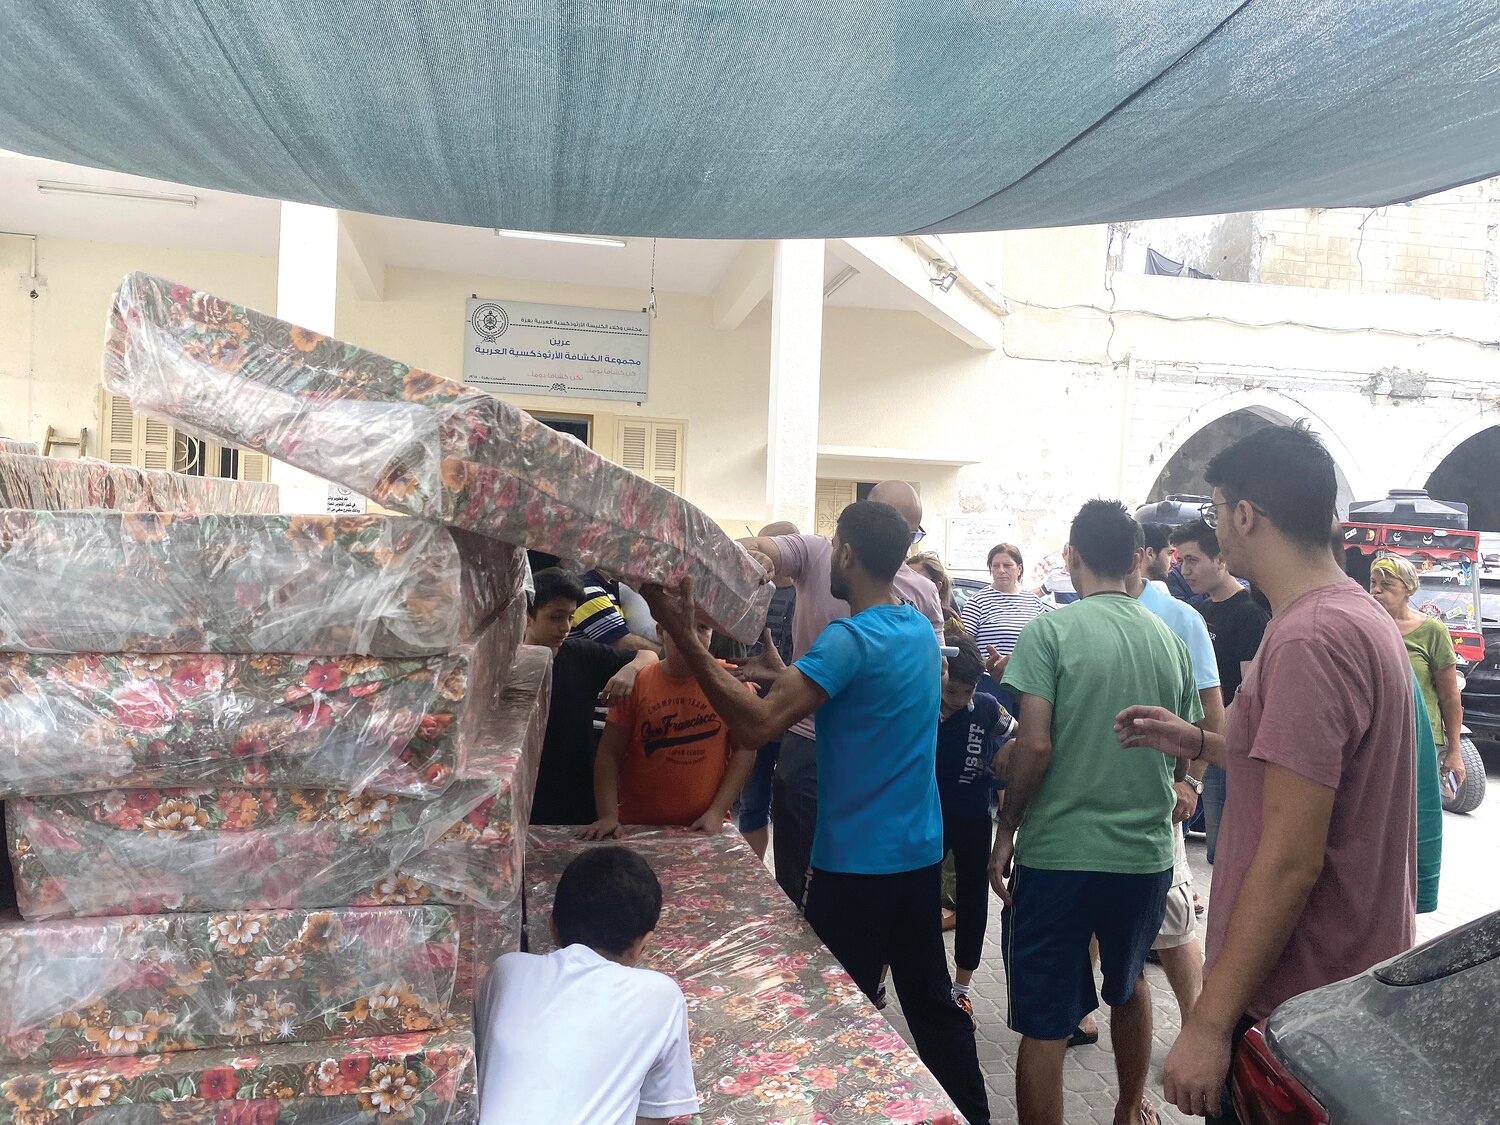 Gazans in need of shelter pick up mattresses purchased by CNEWA to help those displaced.